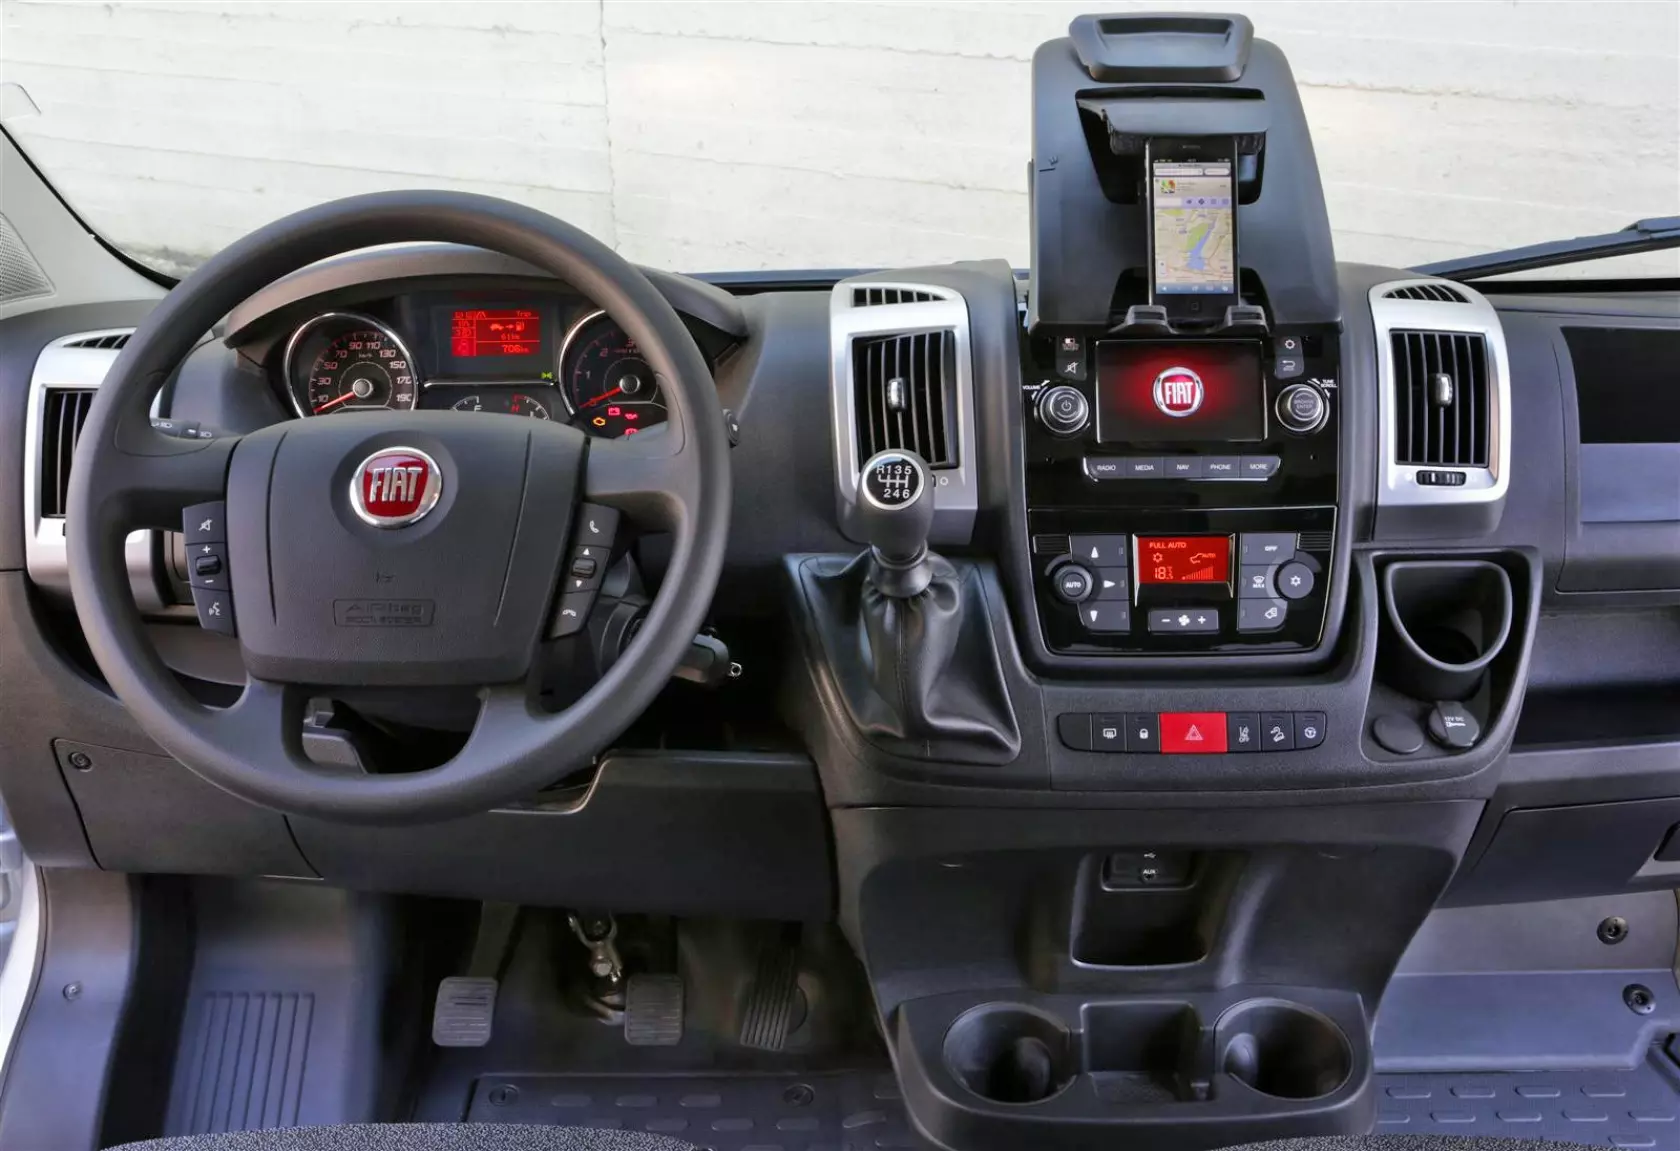 https://gazeo.com/images/gazeo_2014_EN/Technology/Vehicles/Here_comes_the_new_Fiat_Ducato_also_on_CNG/mcith/Fiat_Ducato_dashboard_with_a_smartphone_gno.webp